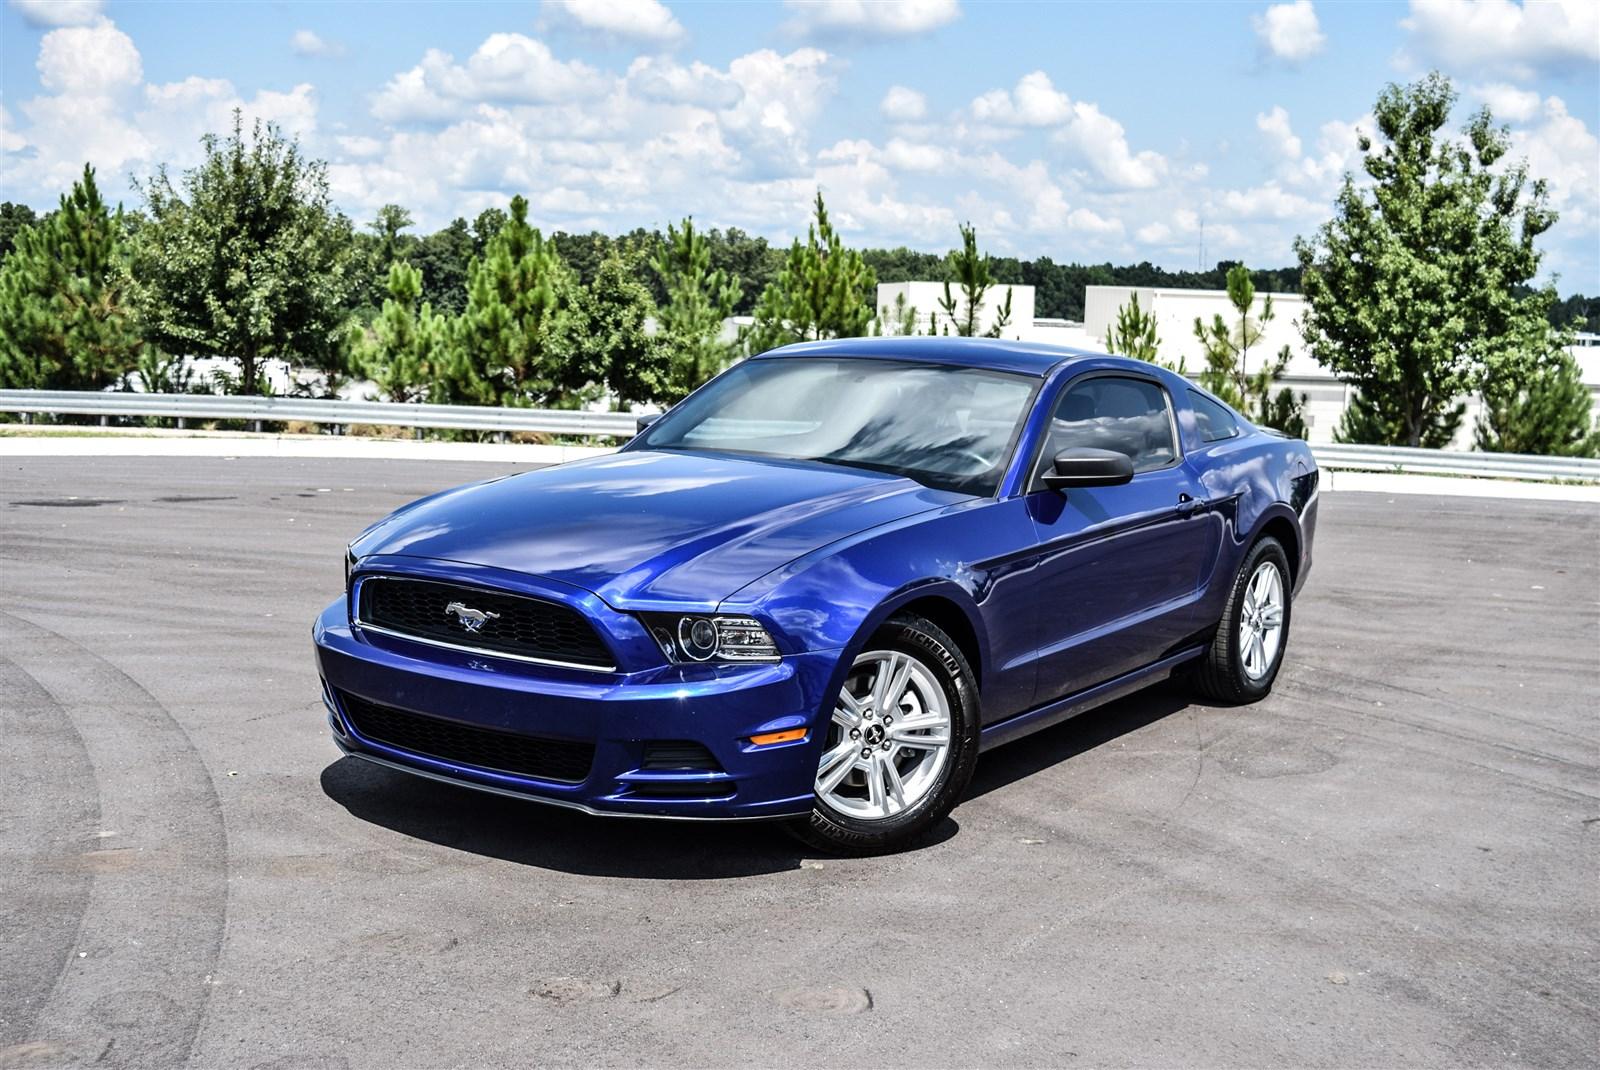 Used 2013 Ford Mustang V6 for sale Sold at Gravity Autos Marietta in Marietta GA 30060 6